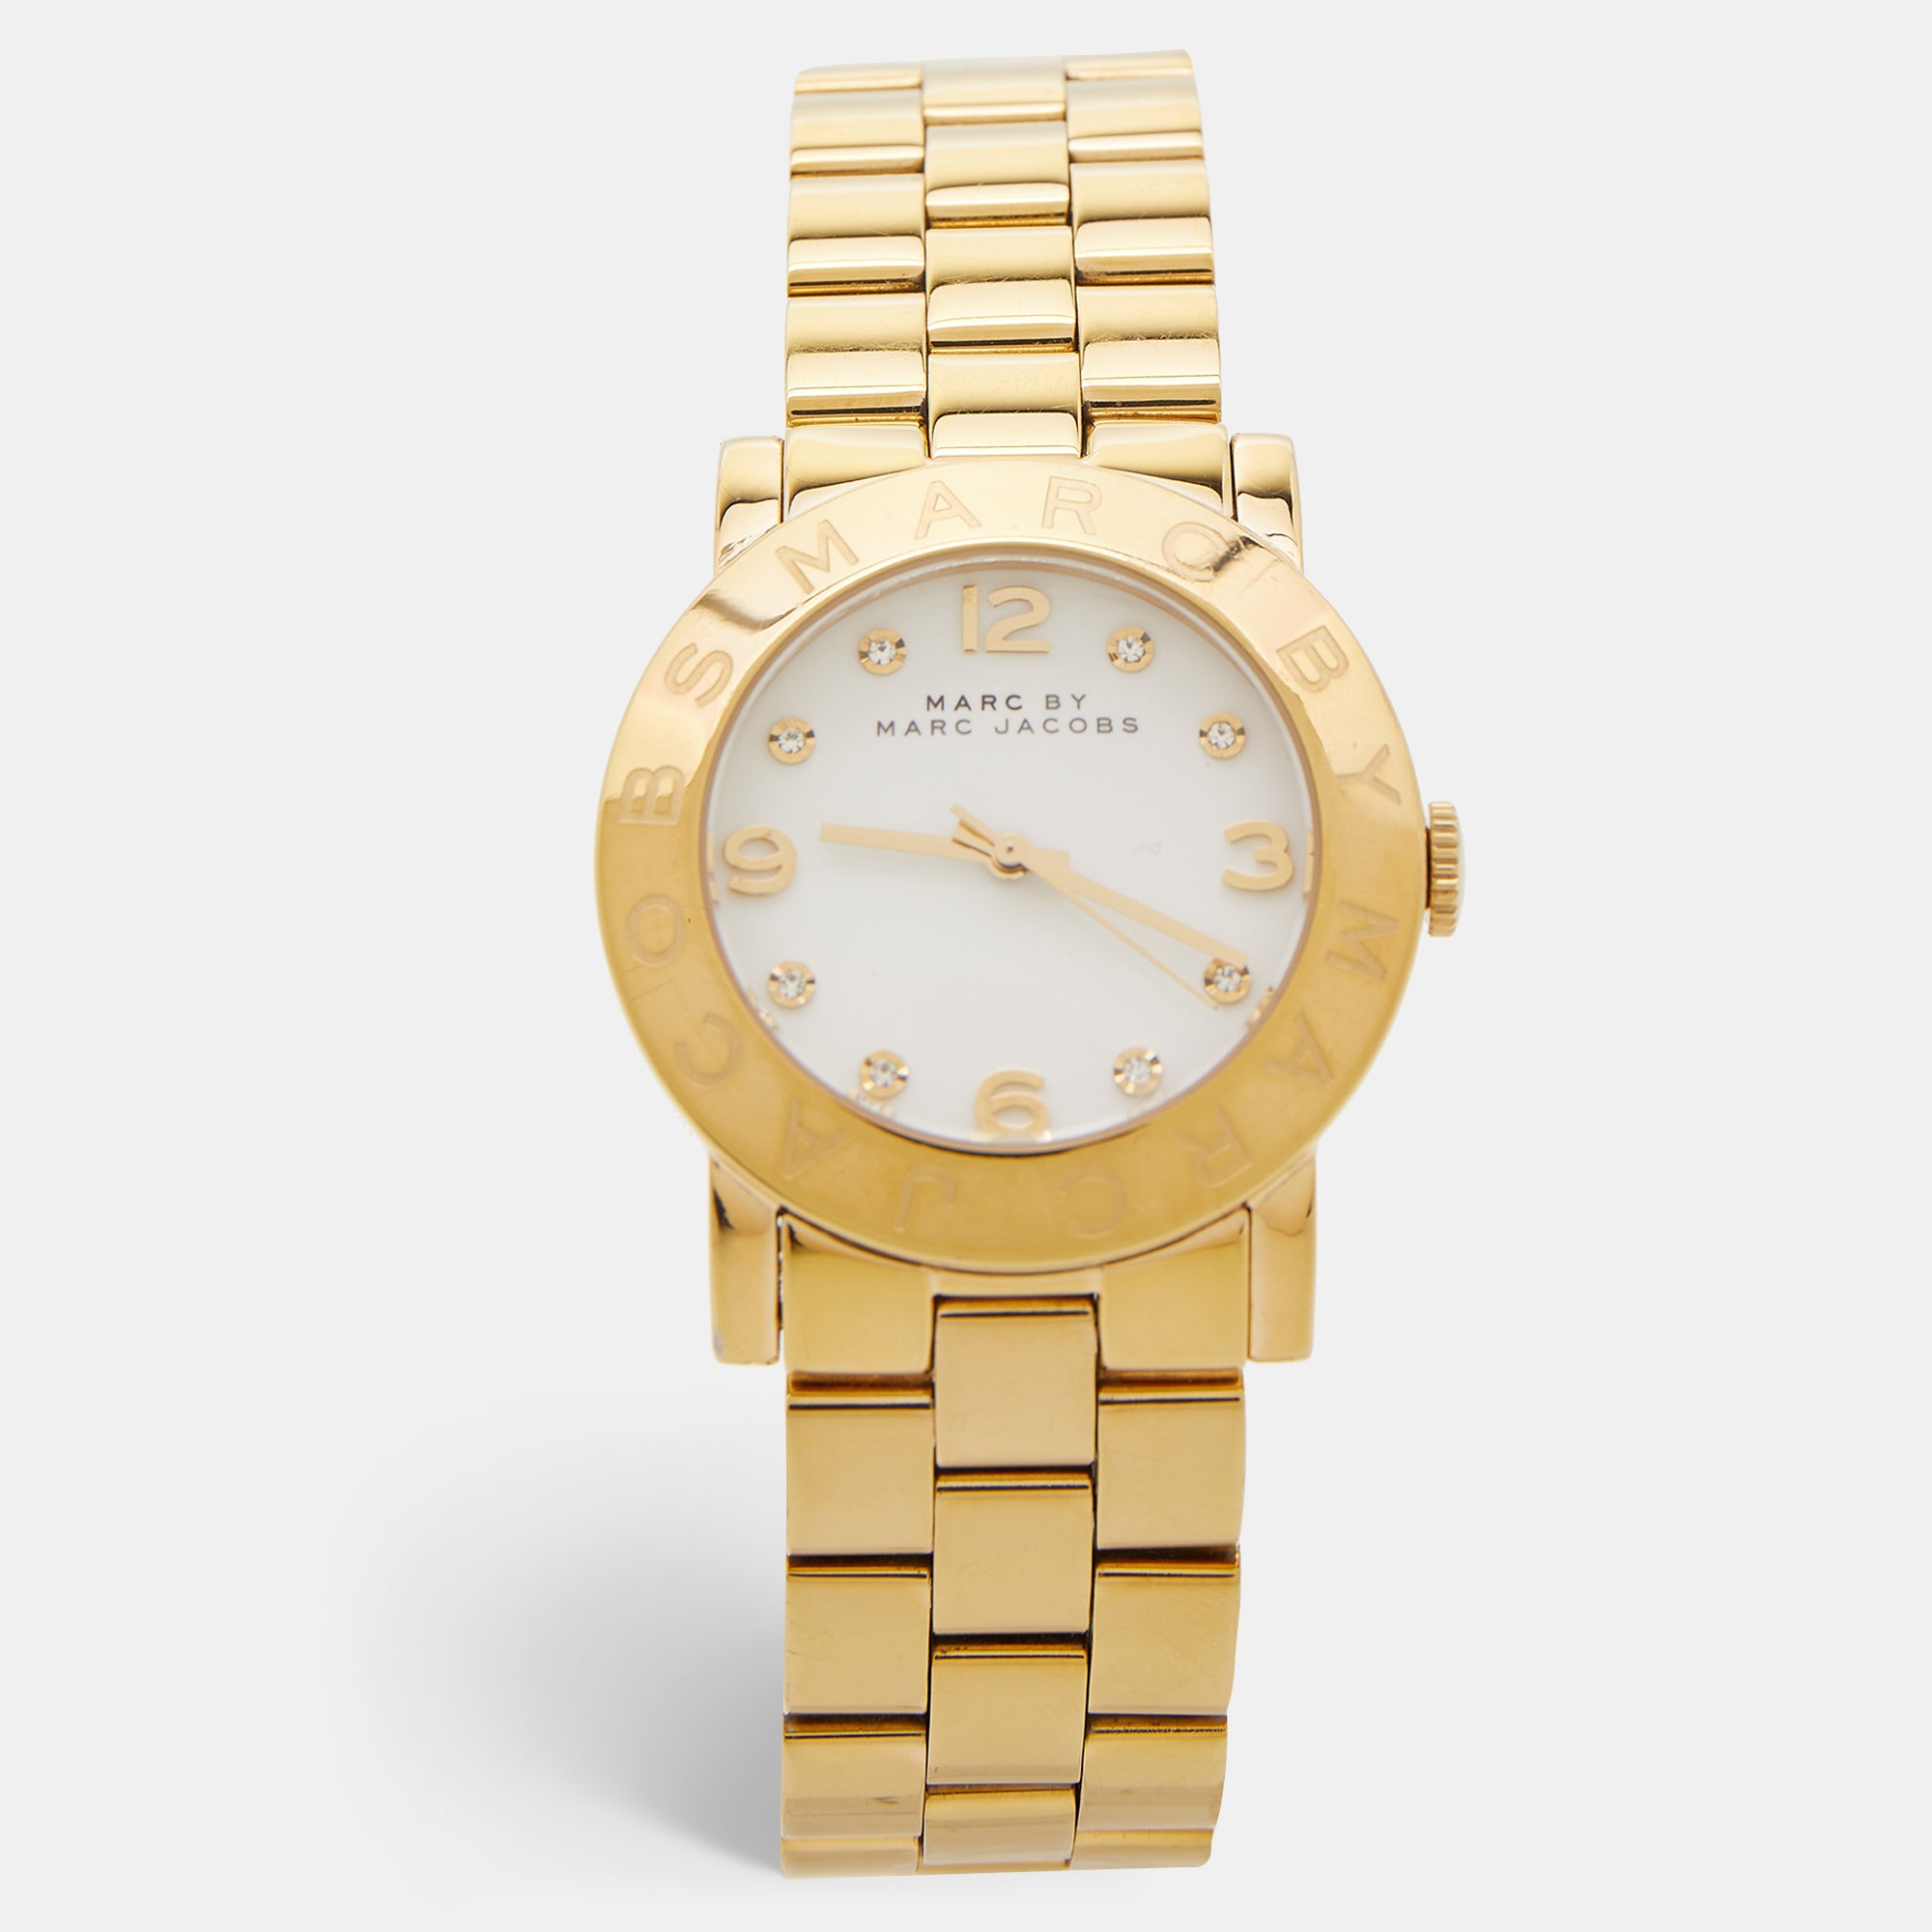 marc by marc jacobs white yellow gold plated stainless steel amy mbm3056 women's wristwatch 36 mm